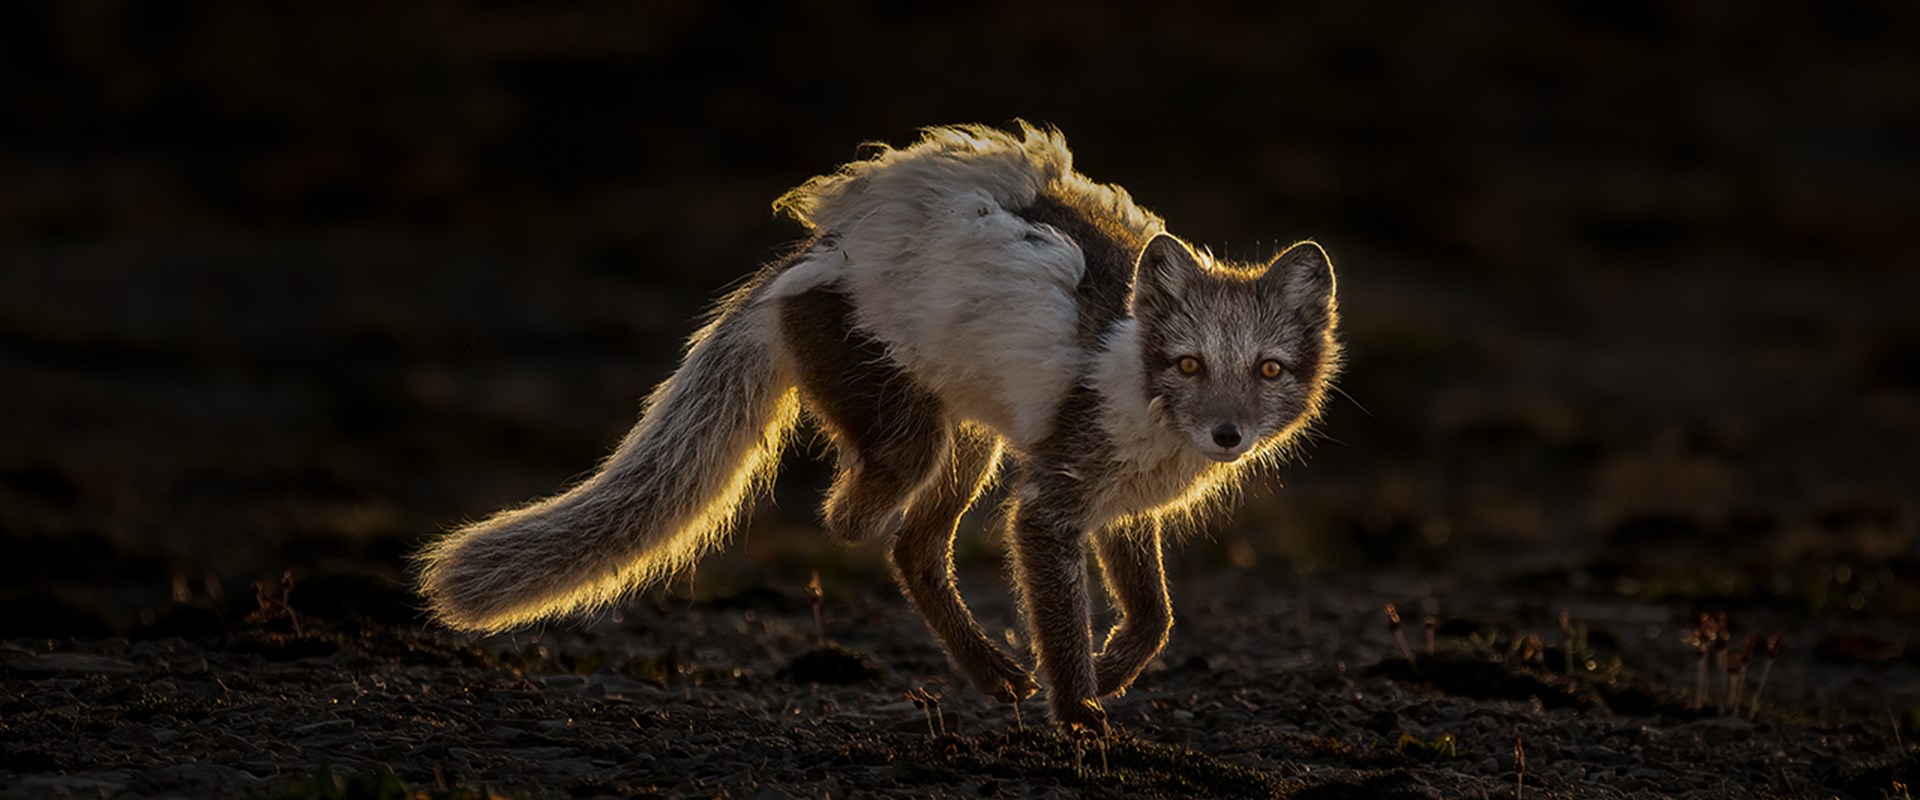 An Arctic fox in its ragged summer coat, backlit by the low, midnight Sun. Despite missing half a hind leg, it appeared to be doing well.